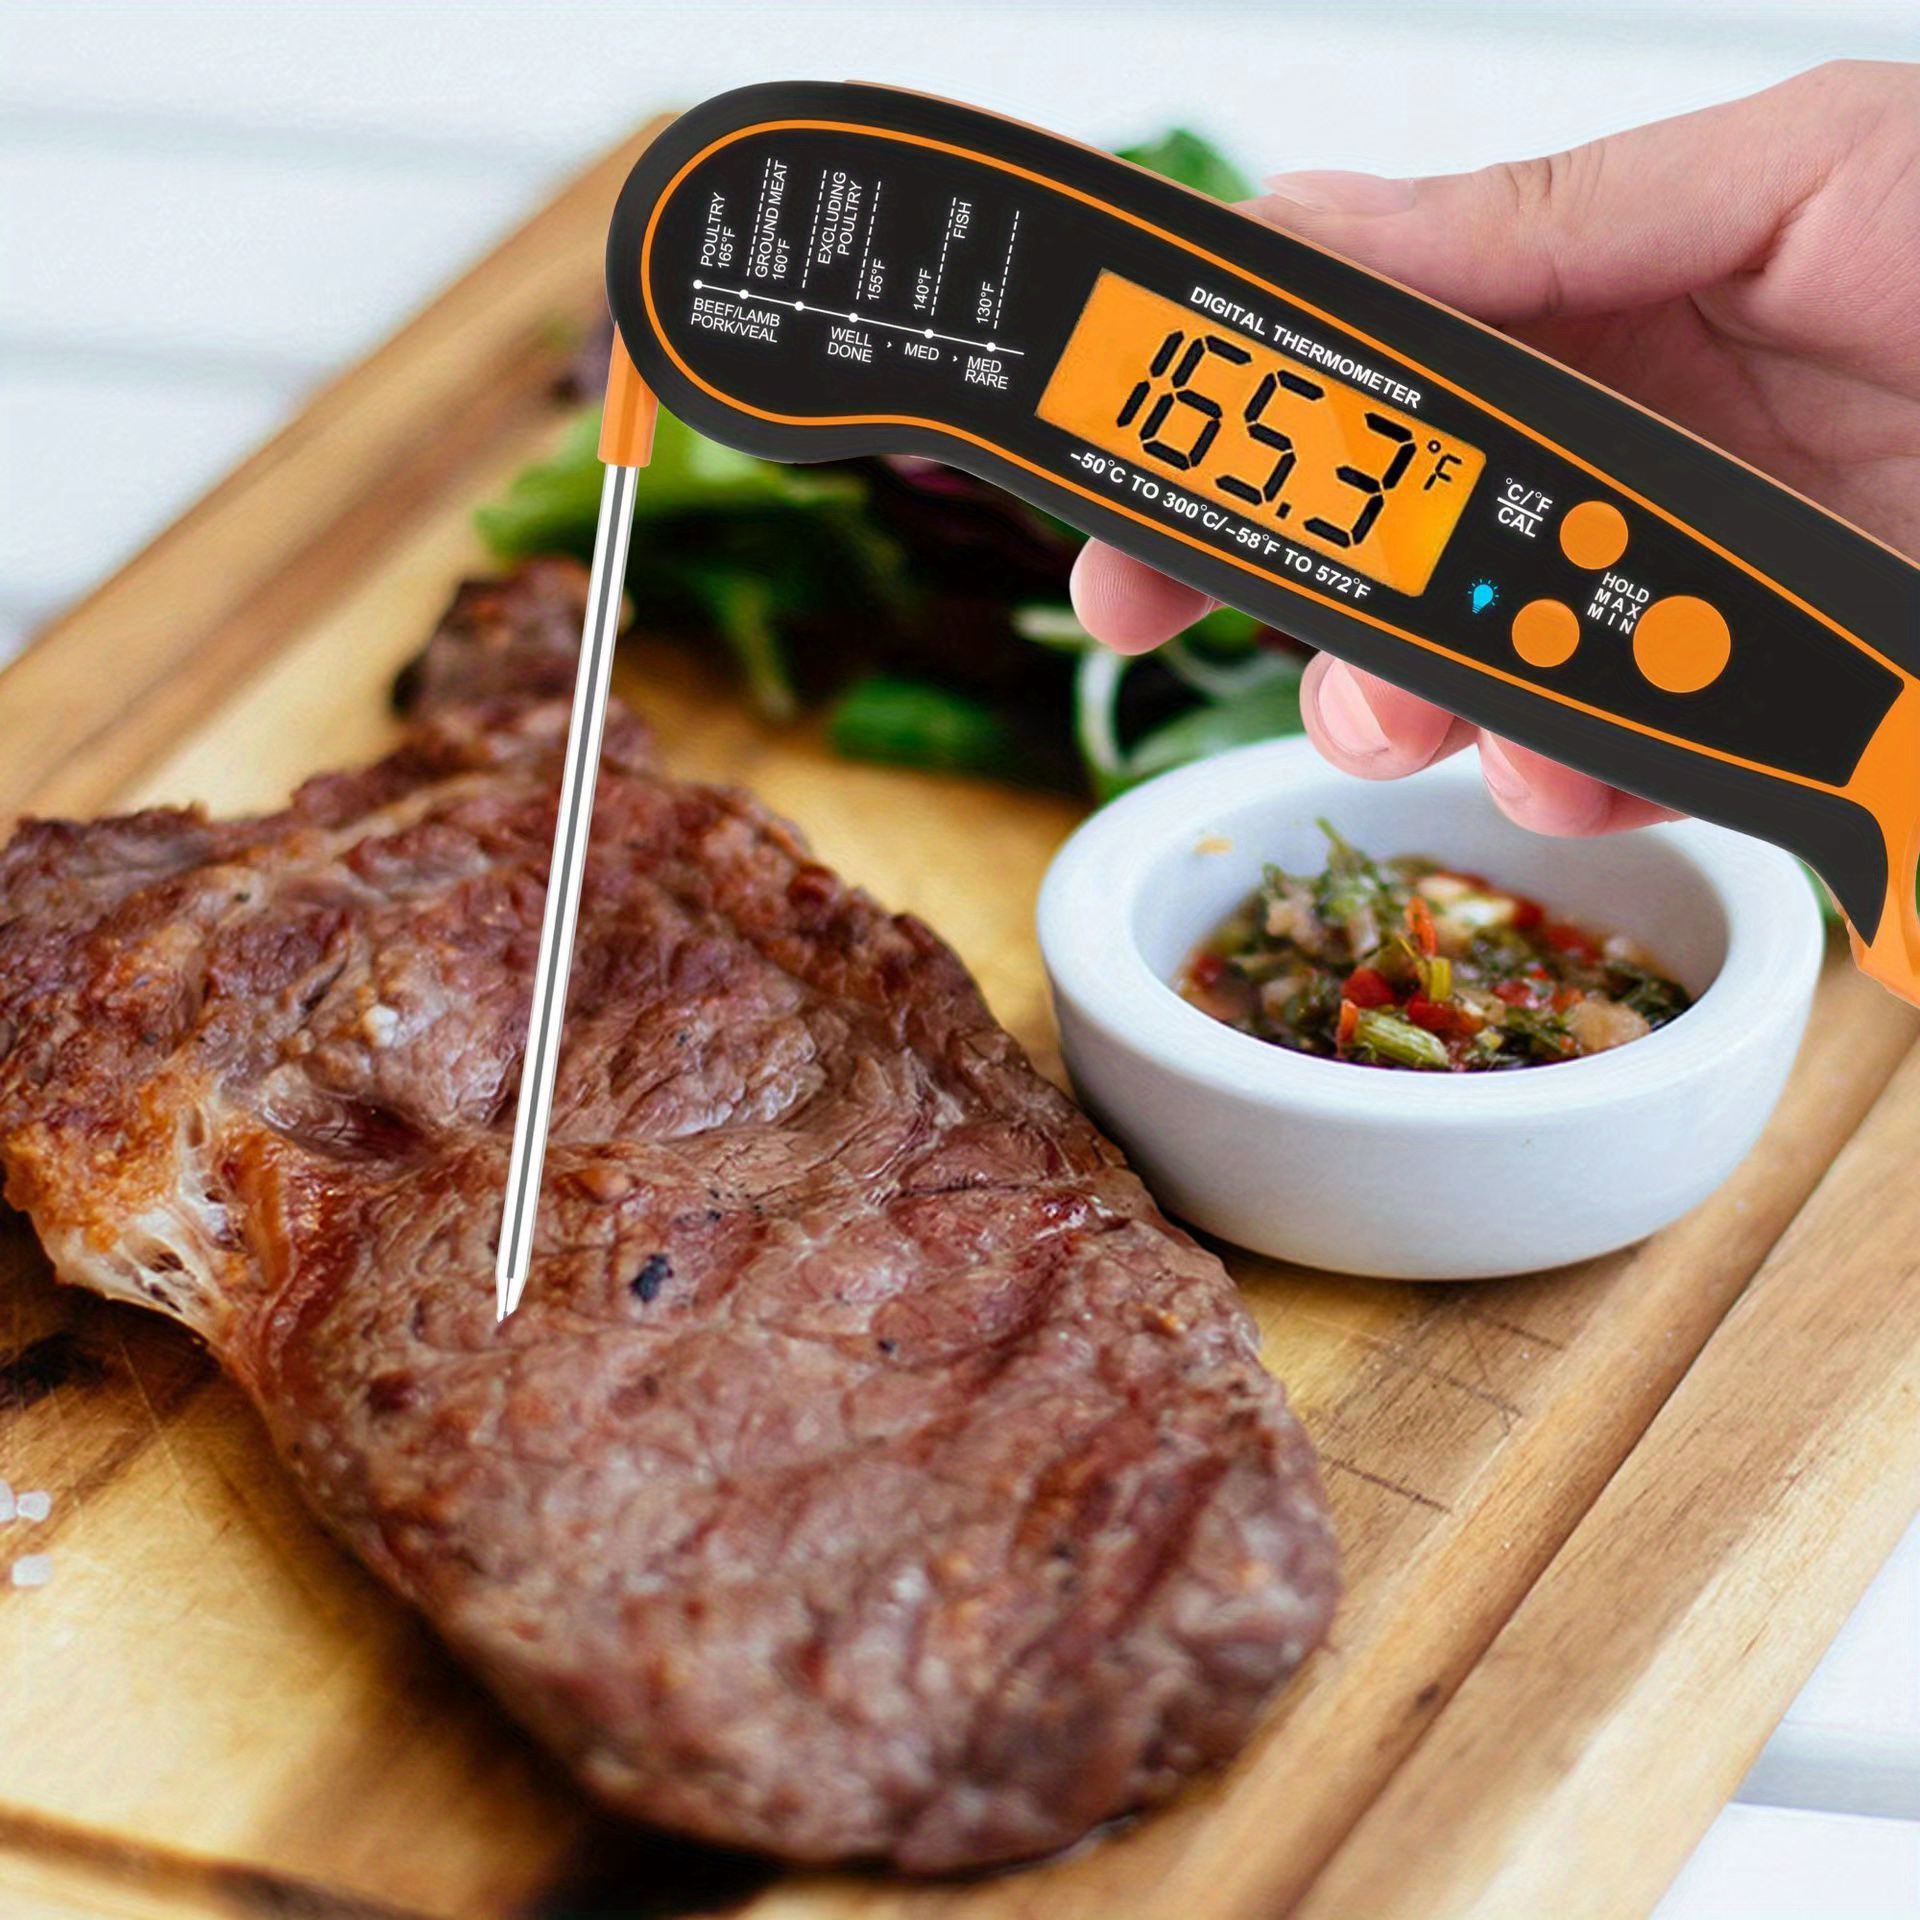 https://img.kwcdn.com/product/meat-thermometers/d69d2f15w98k18-44db04fb/1e78ea0000/c5ad64a7-5771-49f5-a7a8-f011c1f50864_1920x1920.jpeg